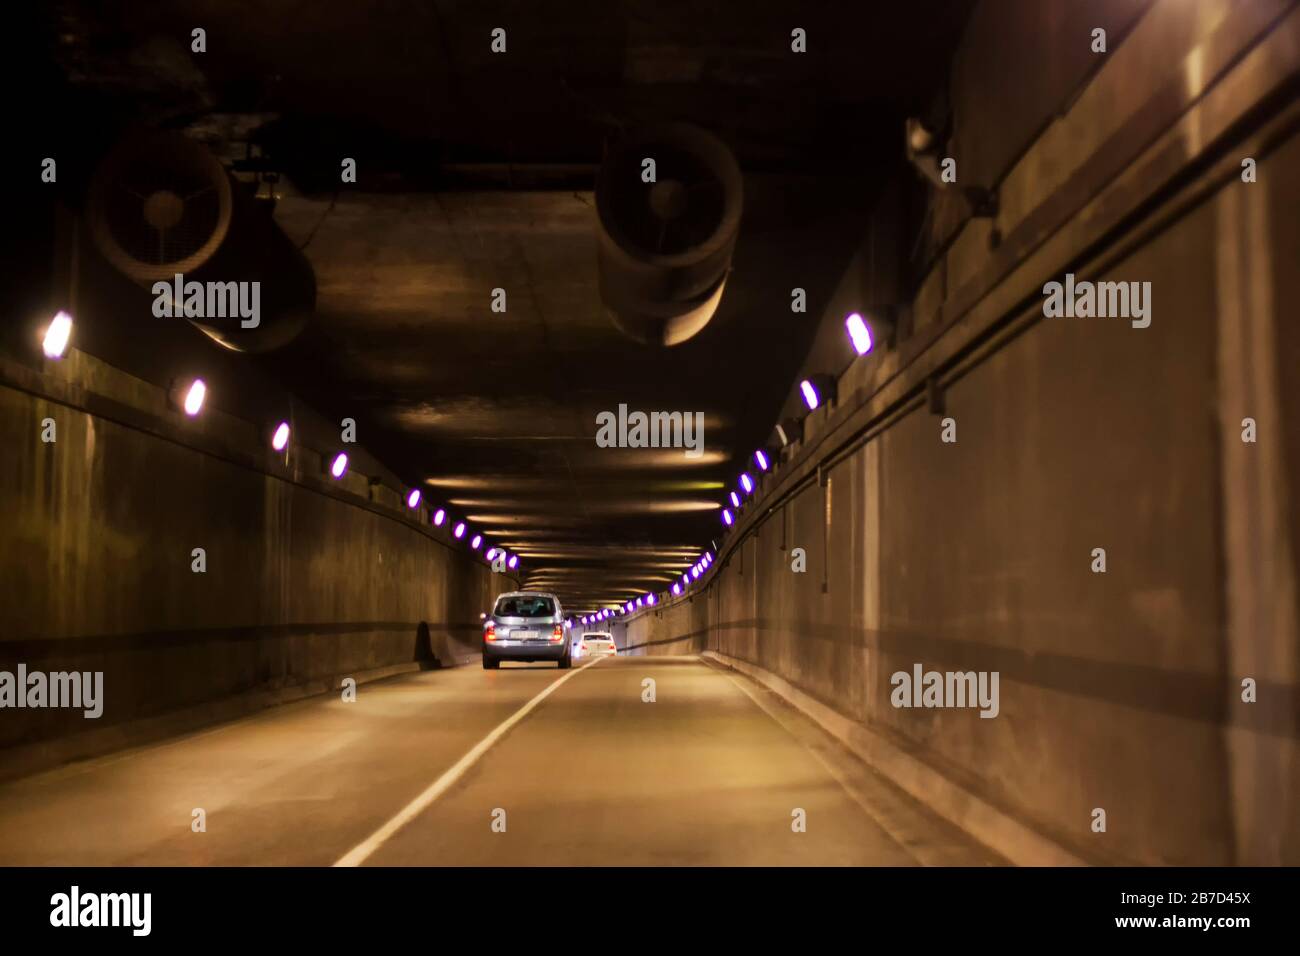 Car in a city tunnel Stock Photo